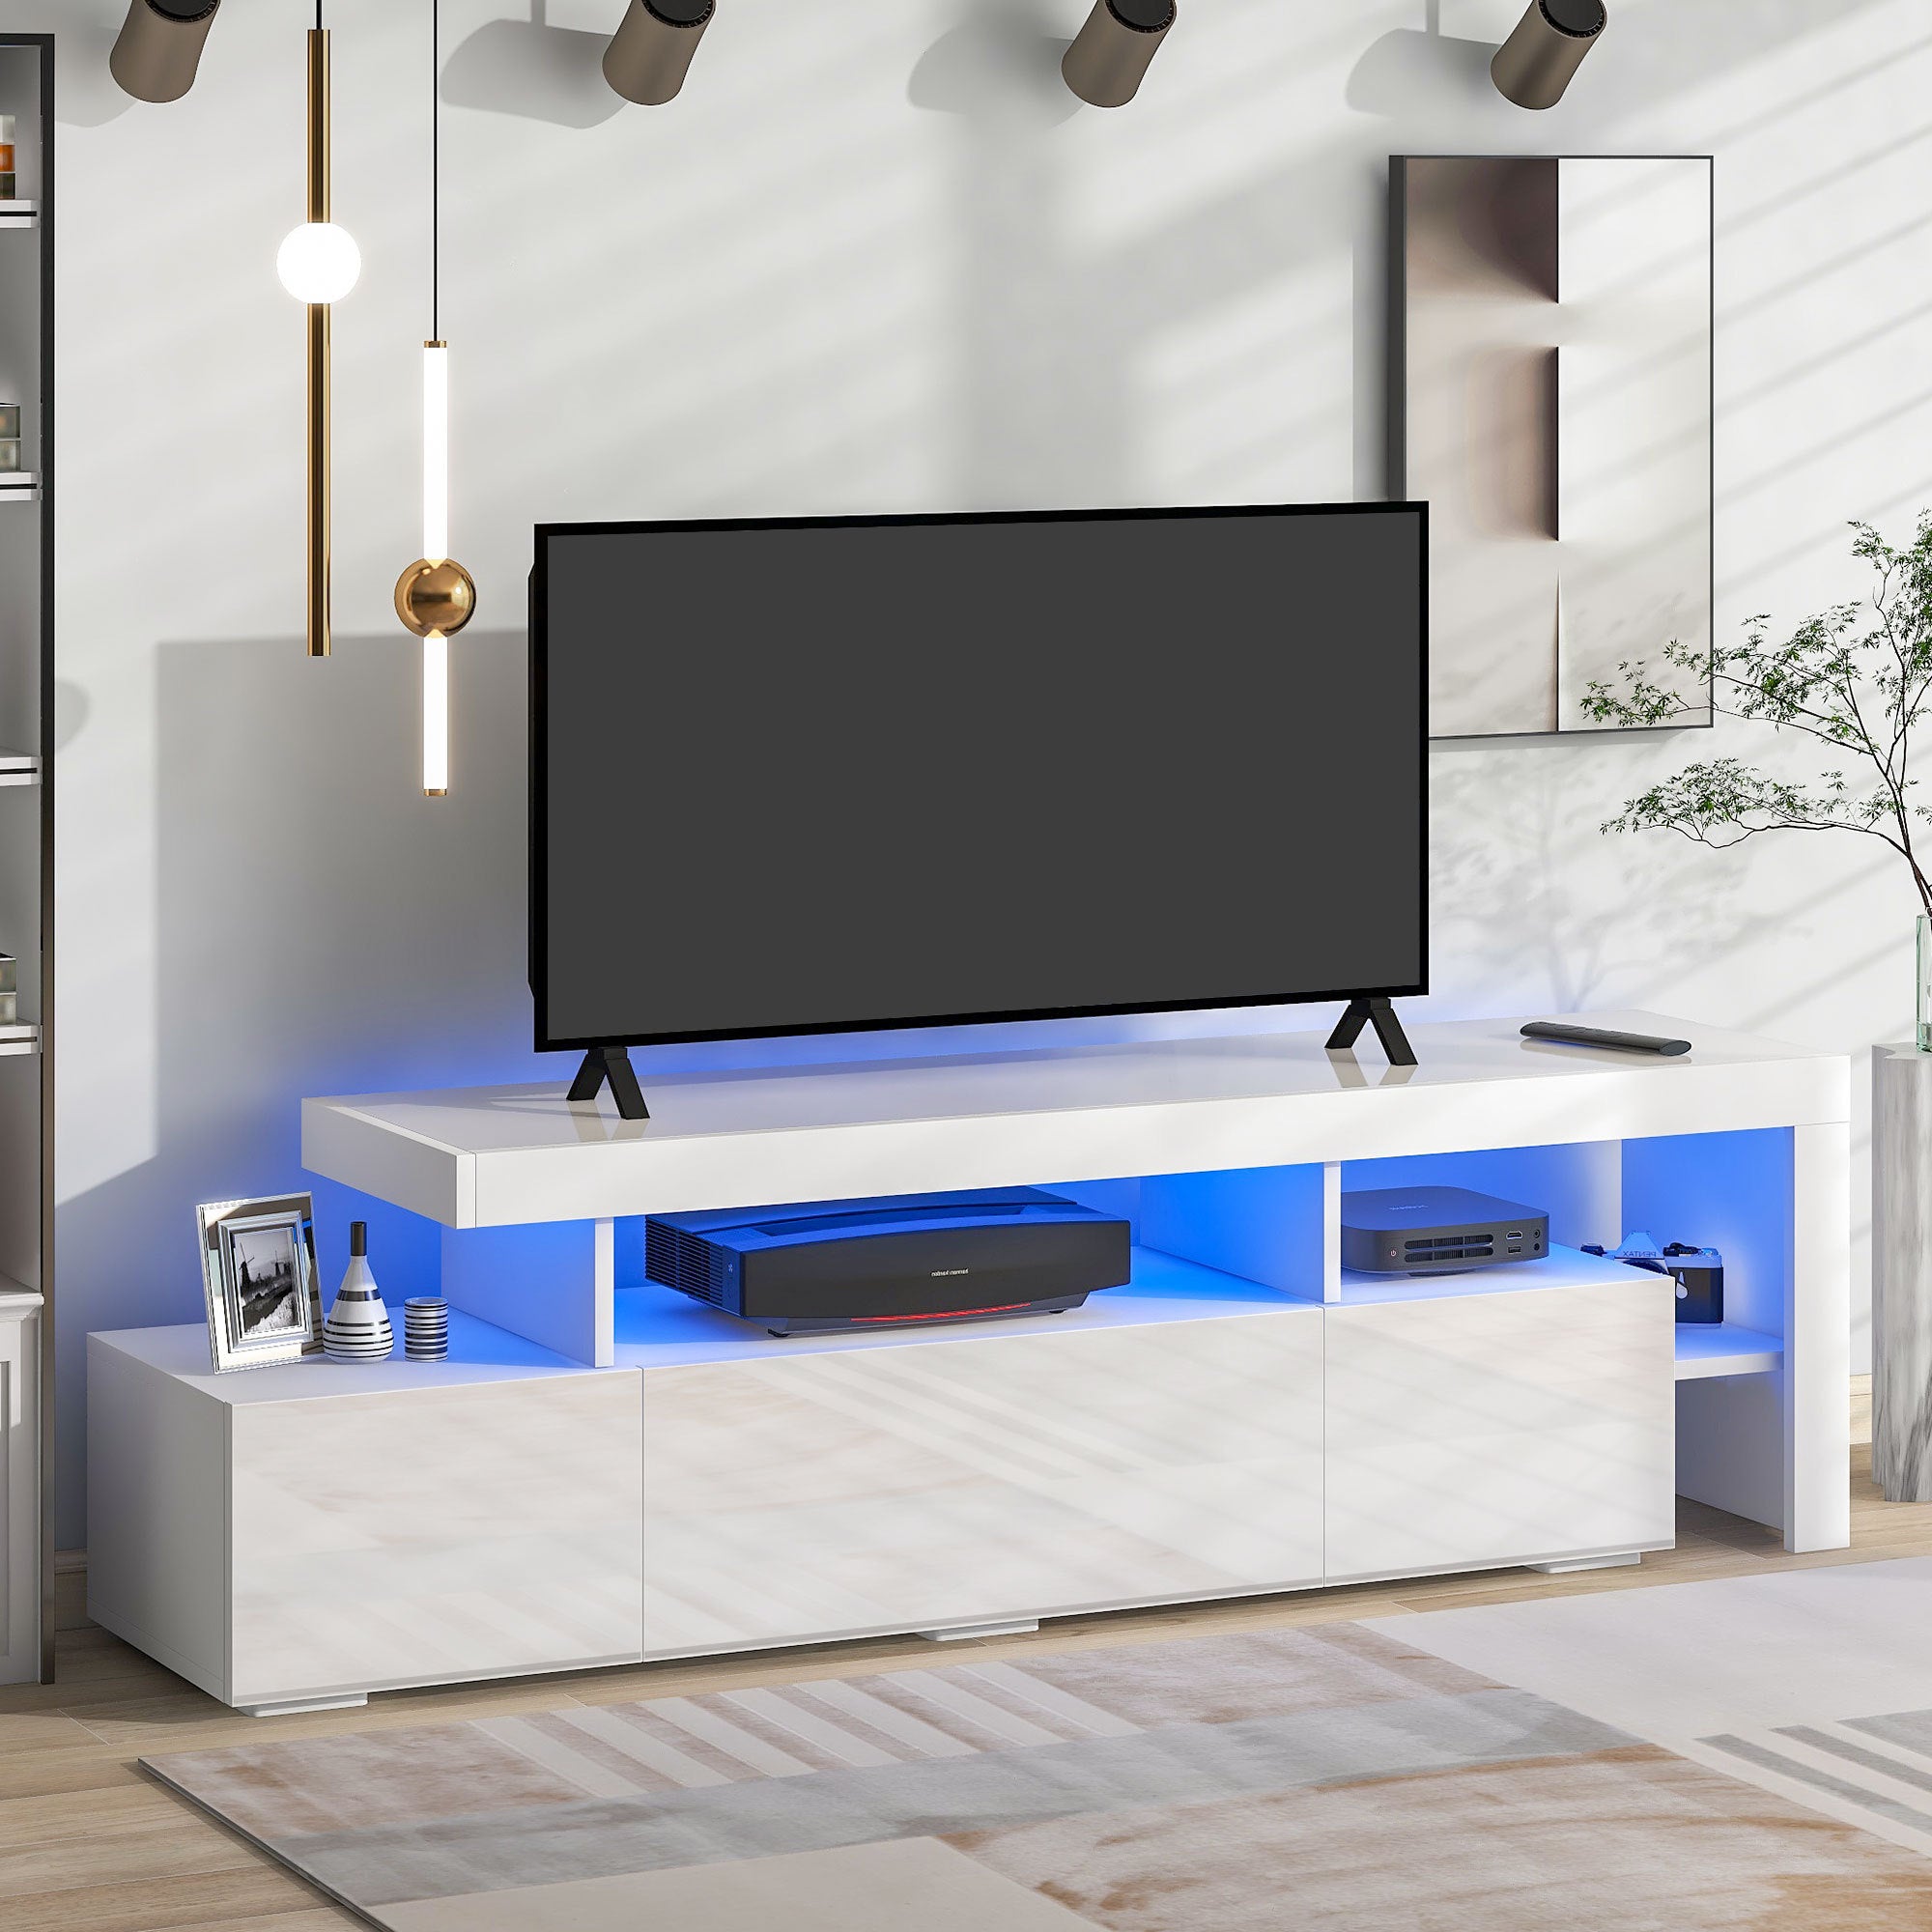 ON-TREND Modern Style 16-colored LED Lights TV Cabinet， UV High Gloss  Surface Entertainment Center with DVD Shelf，, Up to 70 inch TV, White